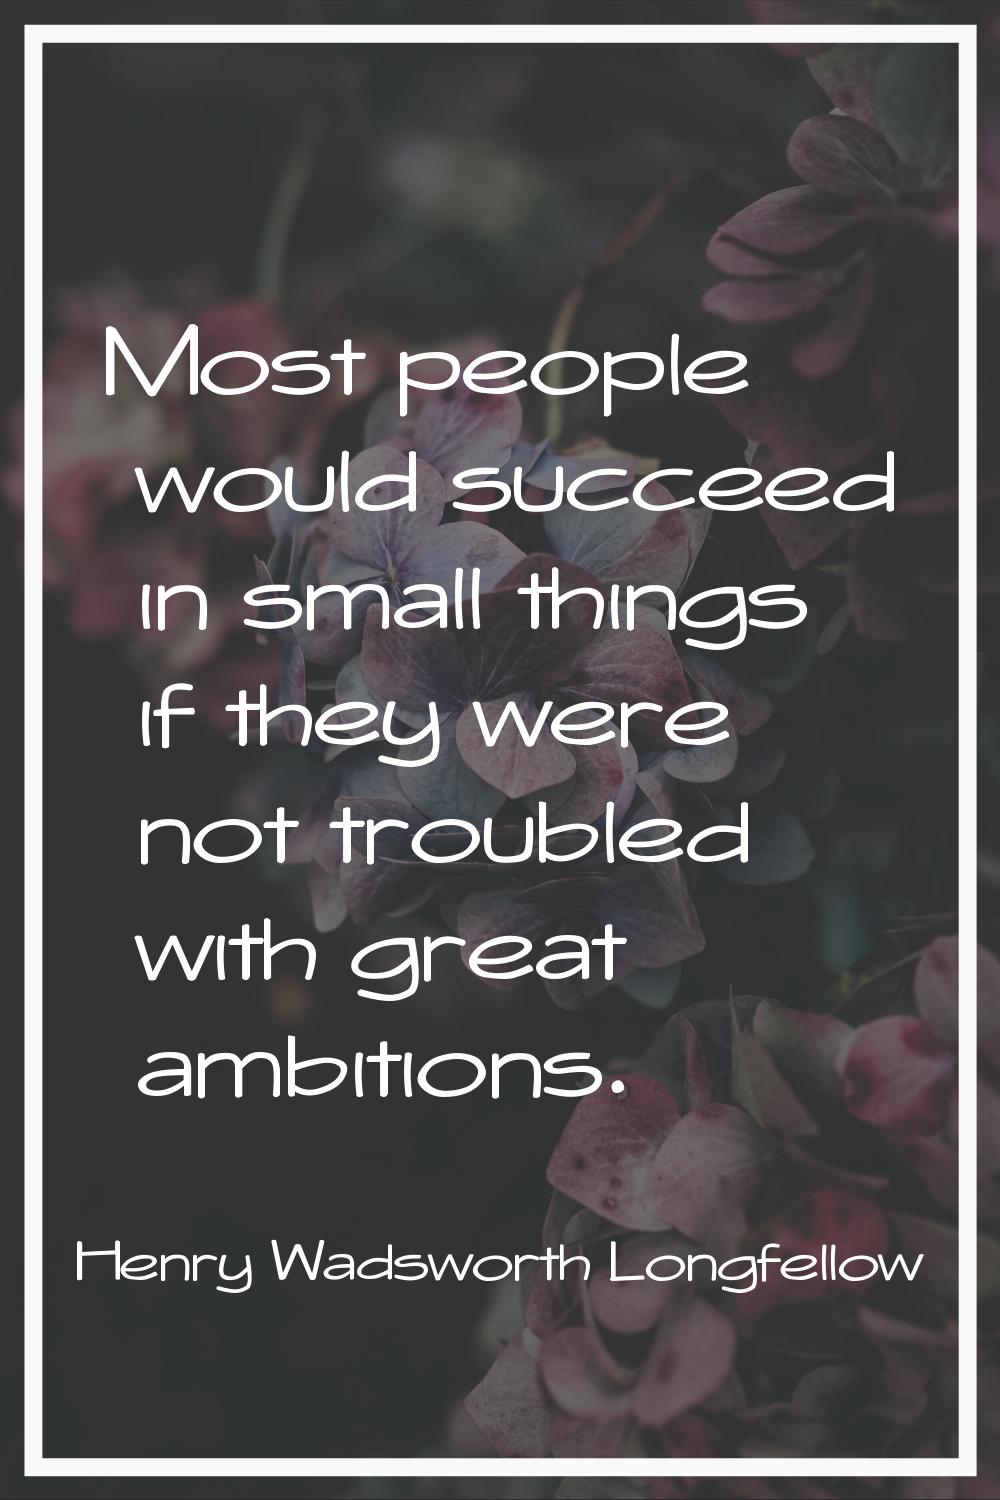 Most people would succeed in small things if they were not troubled with great ambitions.